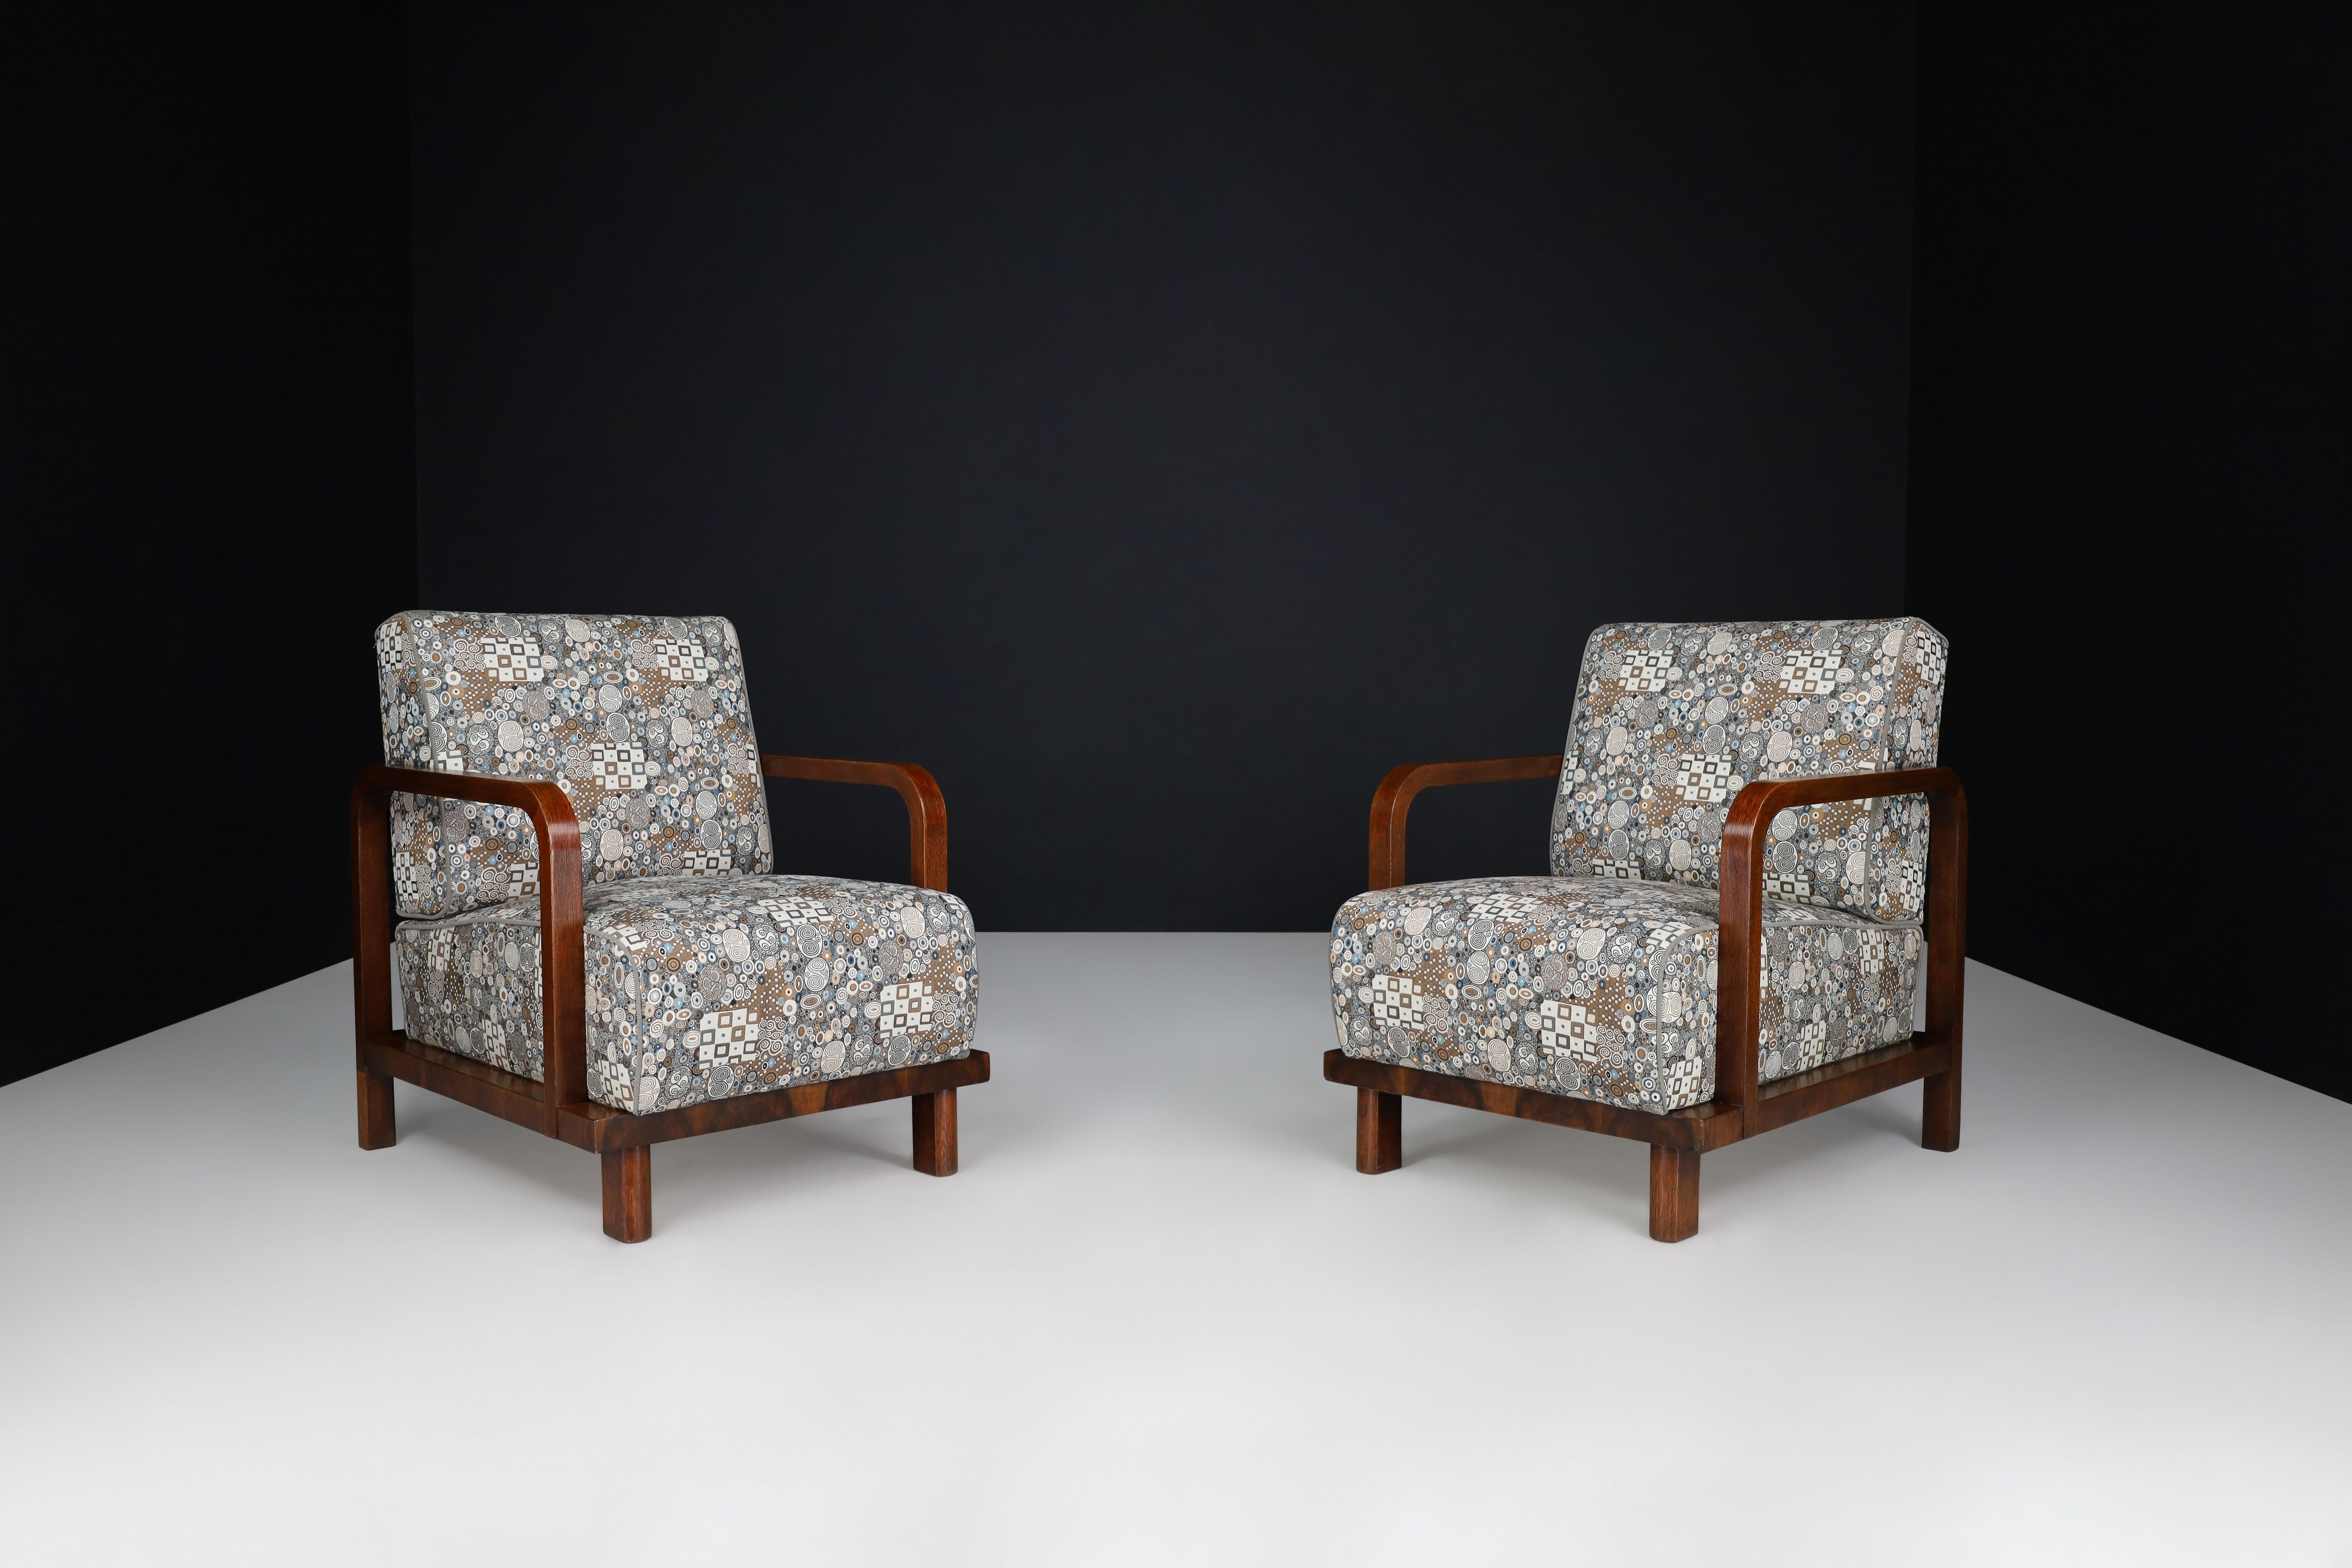 20th Century Pair of Two Art Deco Lounge Chairs Re-upholstered  Art Deco Fabric, France 1930s For Sale